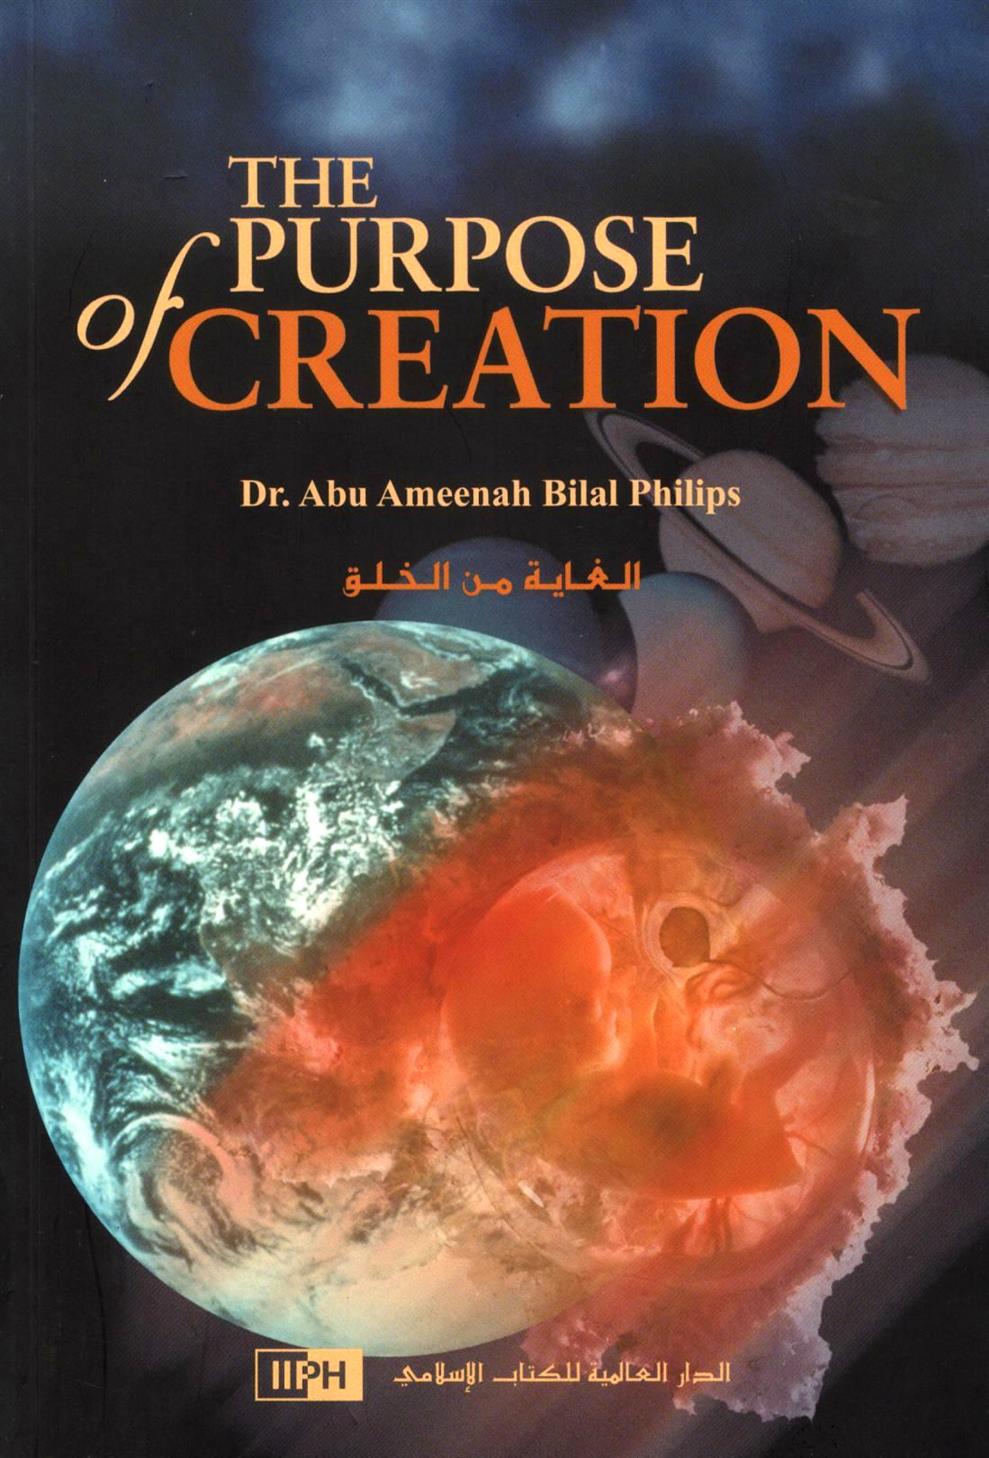 The Purpose of creation Book by Bilal Philips